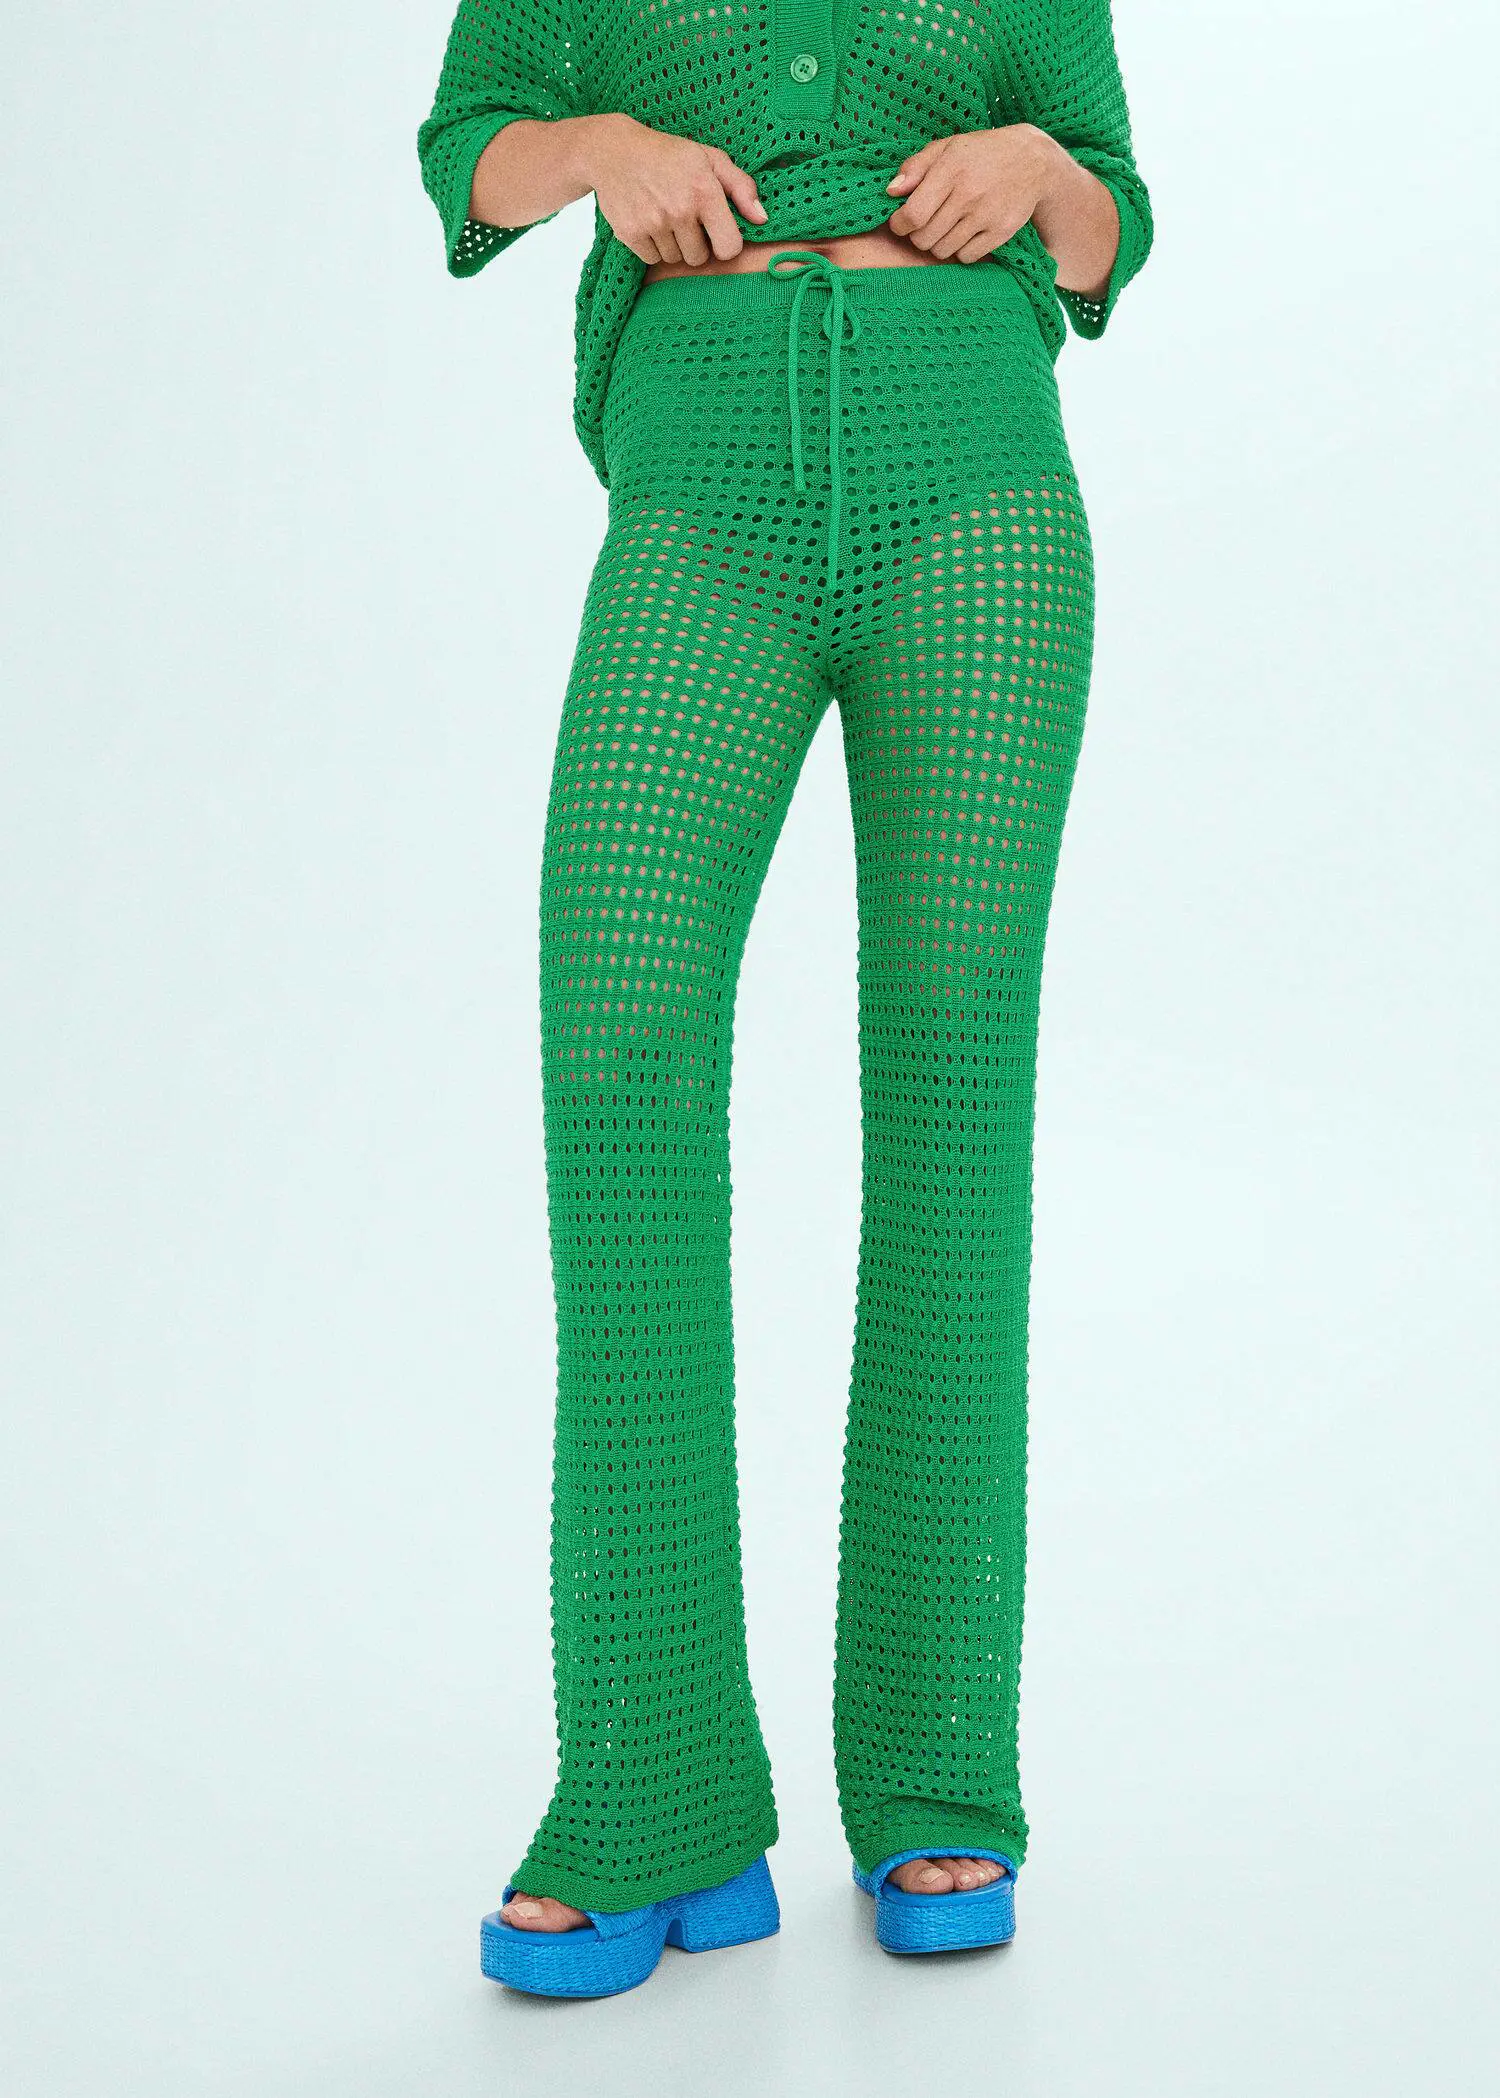 Mango Openwork knit pants. a person wearing a green outfit standing up. 